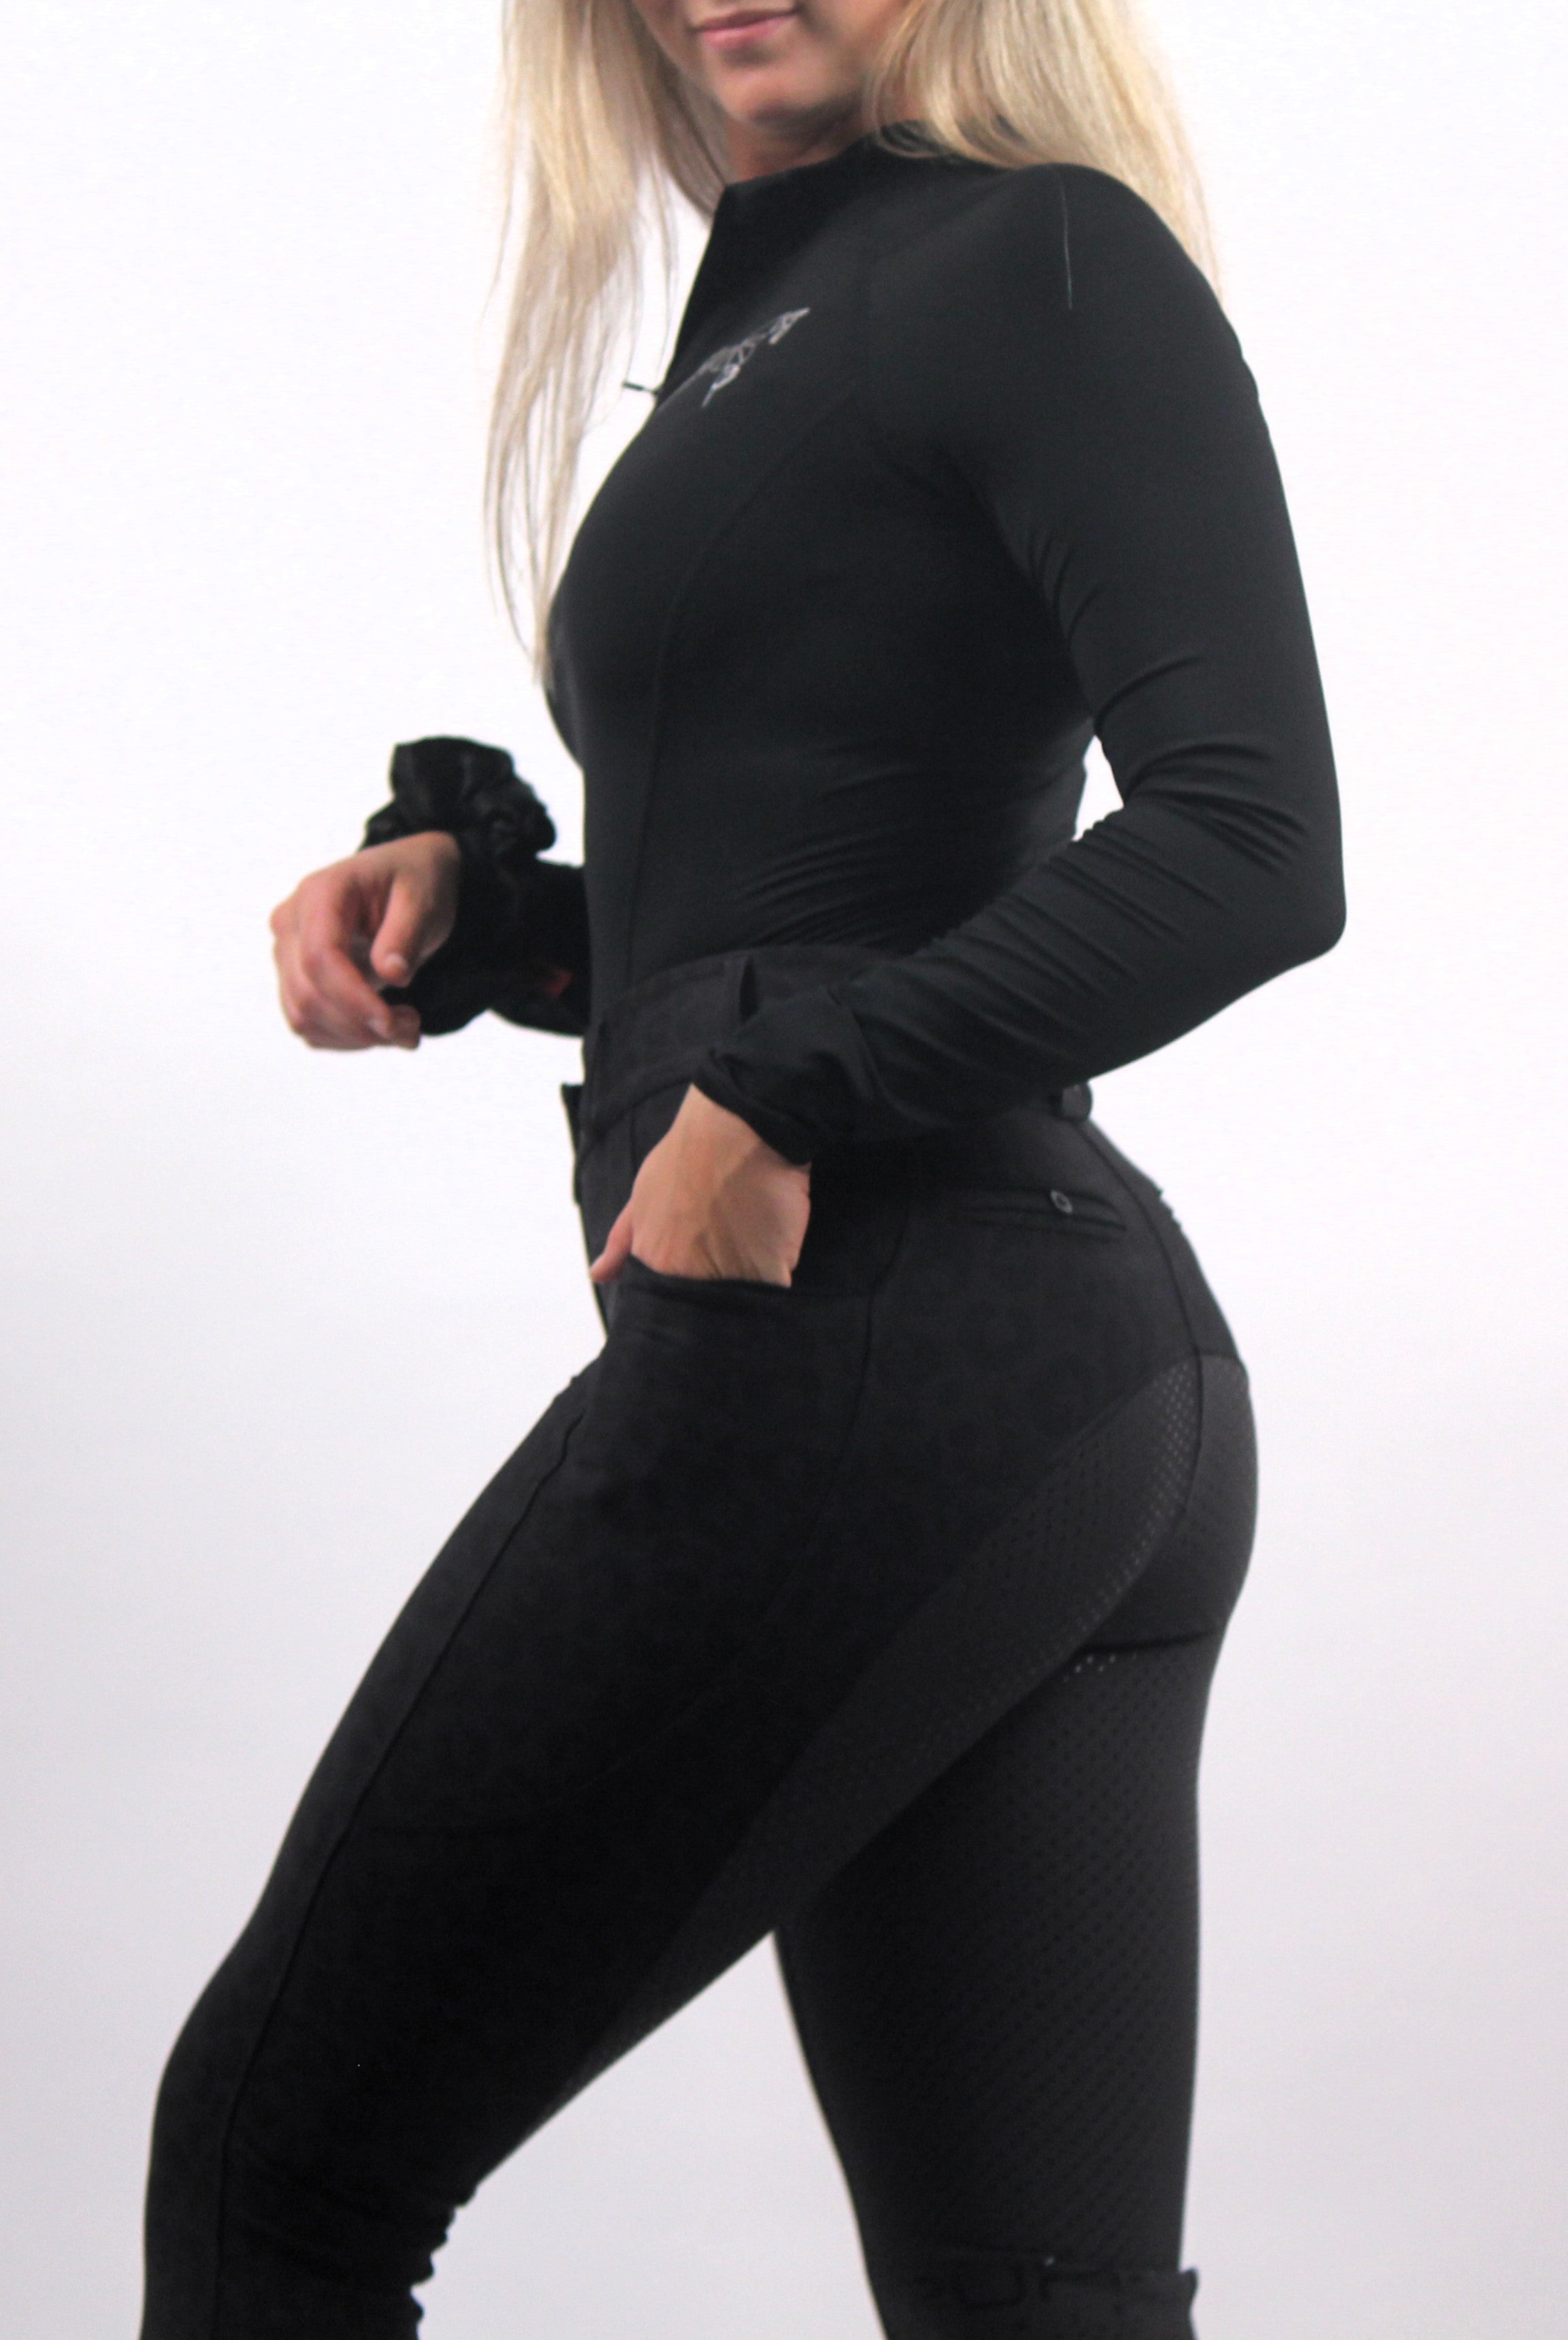 A person in black athletic wear stands on a plain background. They are wearing a long-sleeved black top and high-waisted The Breeches - Black Leopard by Pure Canter, made of performance fabric, with one hand in their pocket. Their face is partially out of the frame, and their long, light-colored hair is visible.